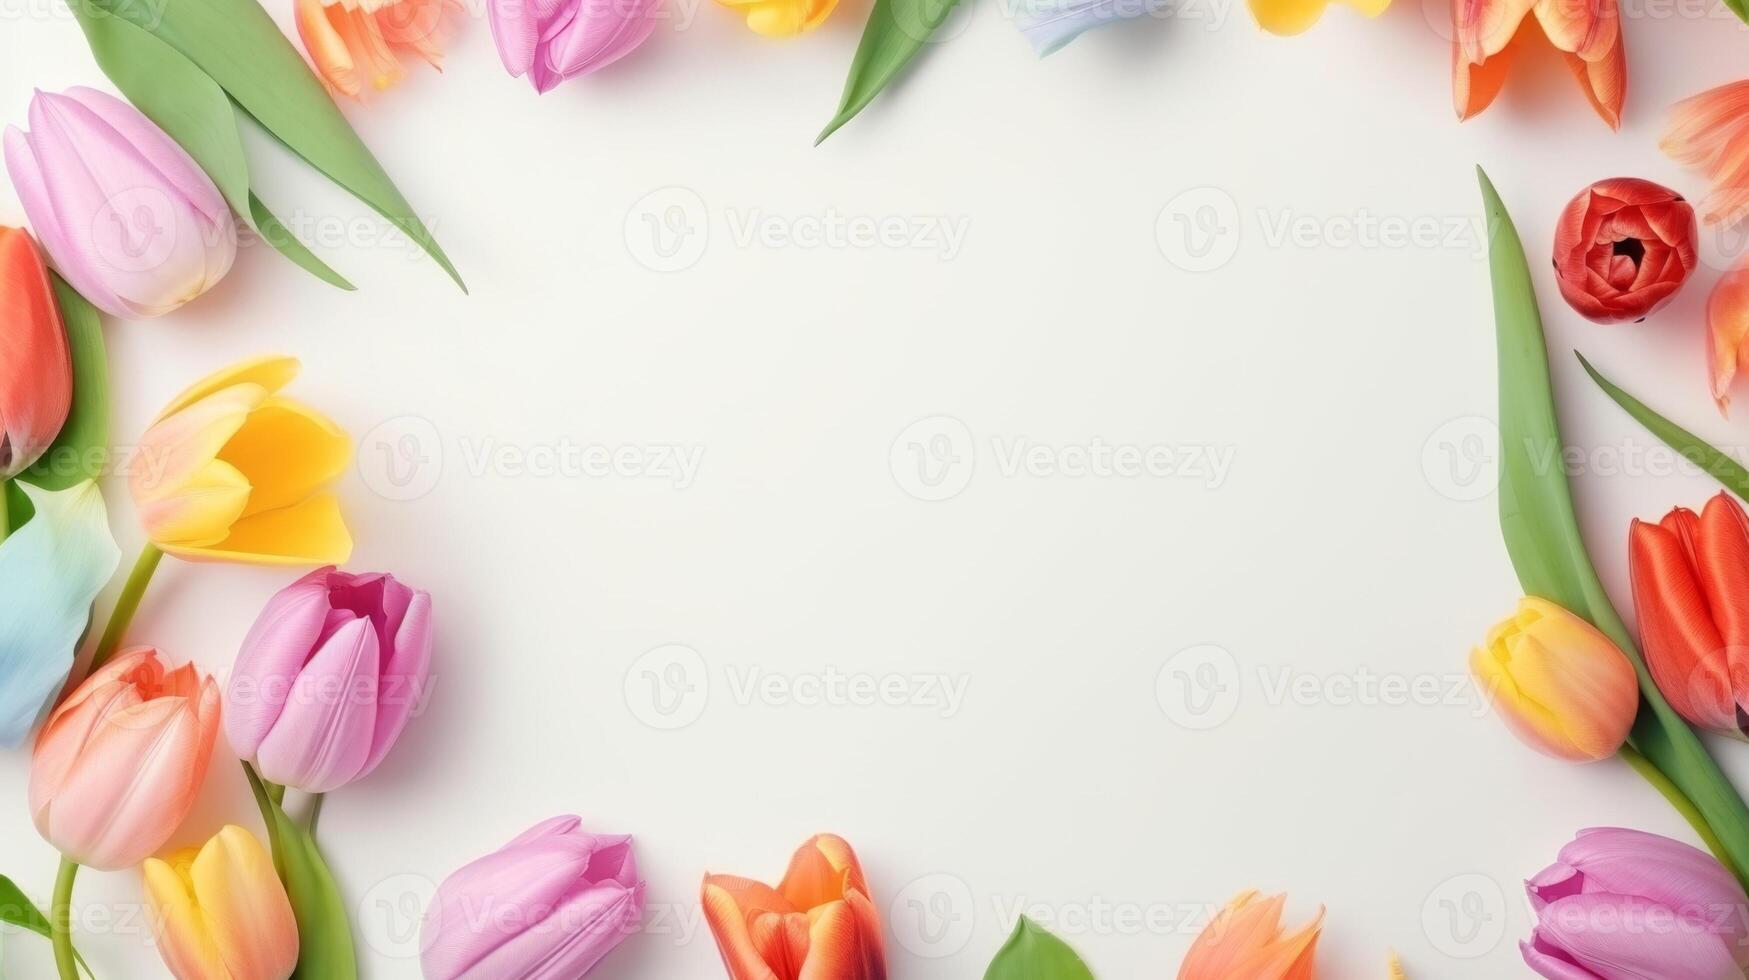 Colorful Tulips Blossoming in Spring Garden Isolated on White Banner for Copy Space Vibrant Floral Nature for Text and Promotion photo